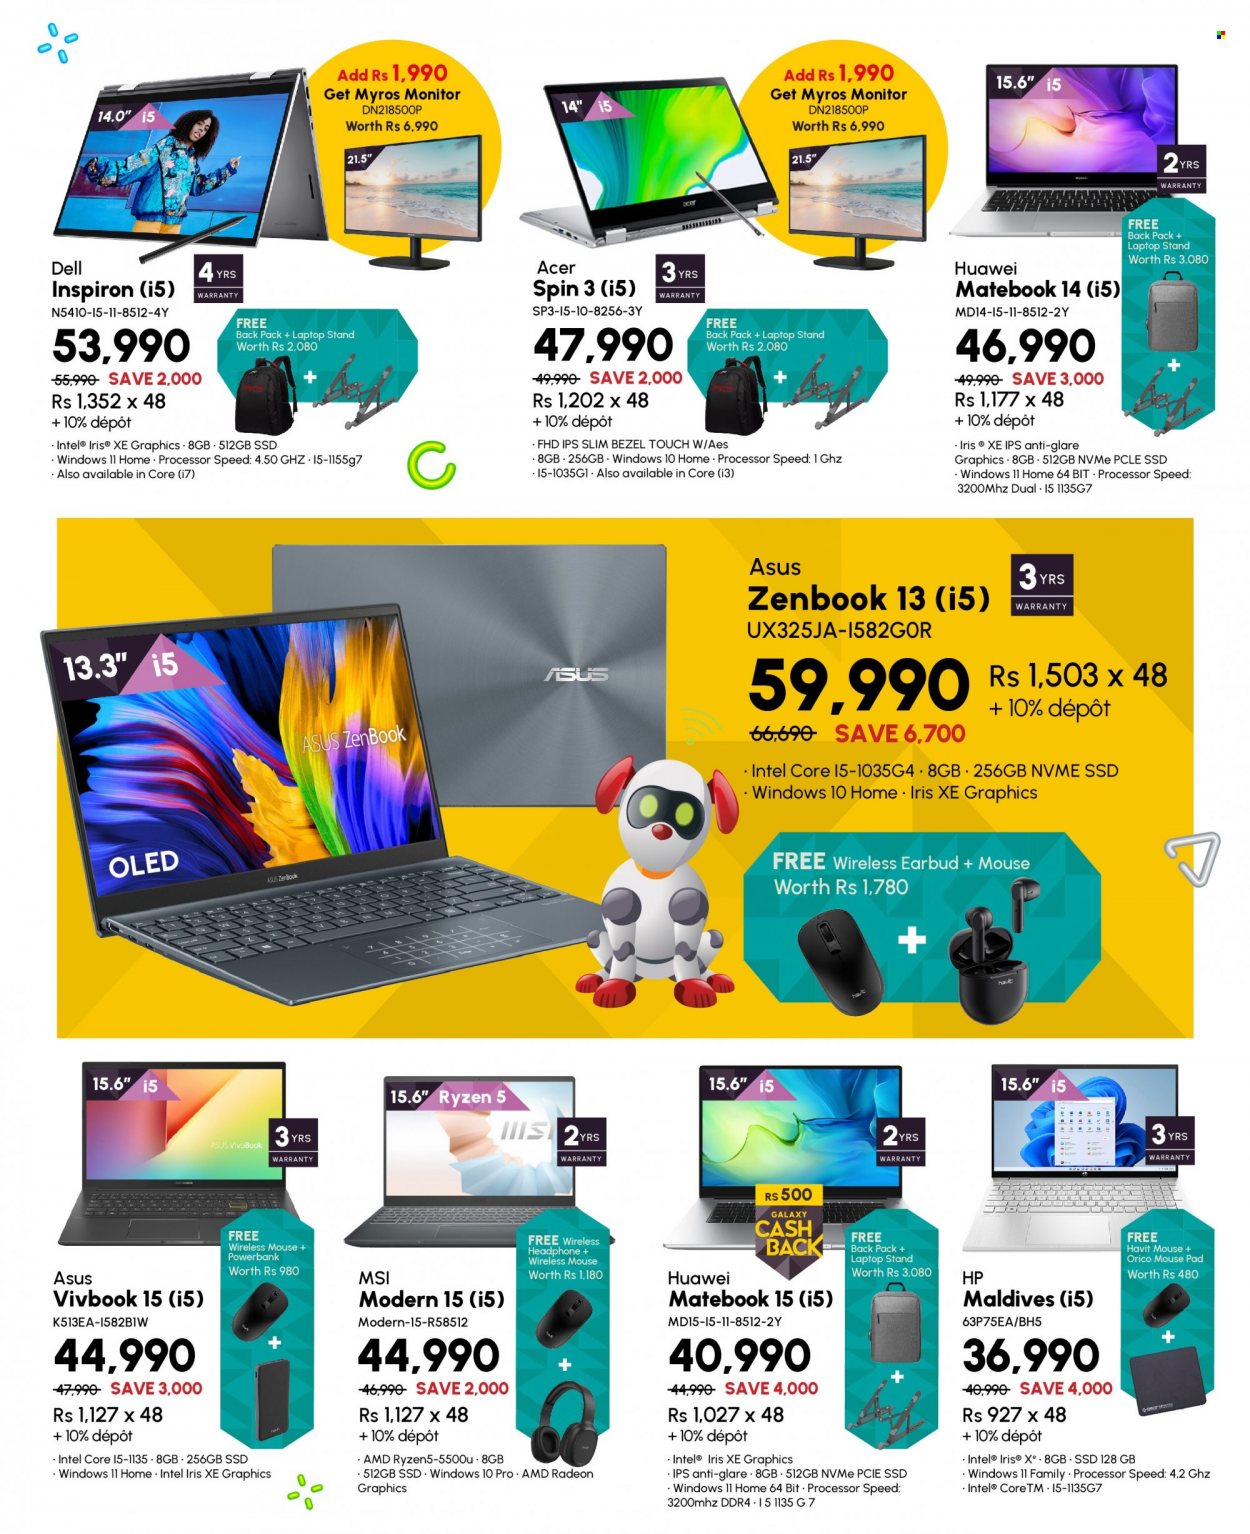 Galaxy Catalogue - 27.07.2022 - 15.08.2022 - Sales products - Havit, Intel, Acer, Hewlett Packard, Huawei, power bank, laptop, MateBook, Inspiron, MSI, mouse, Radeon, mouse pad, AMD Radeon, headphones, Asus, Dell, monitor. Page 4.